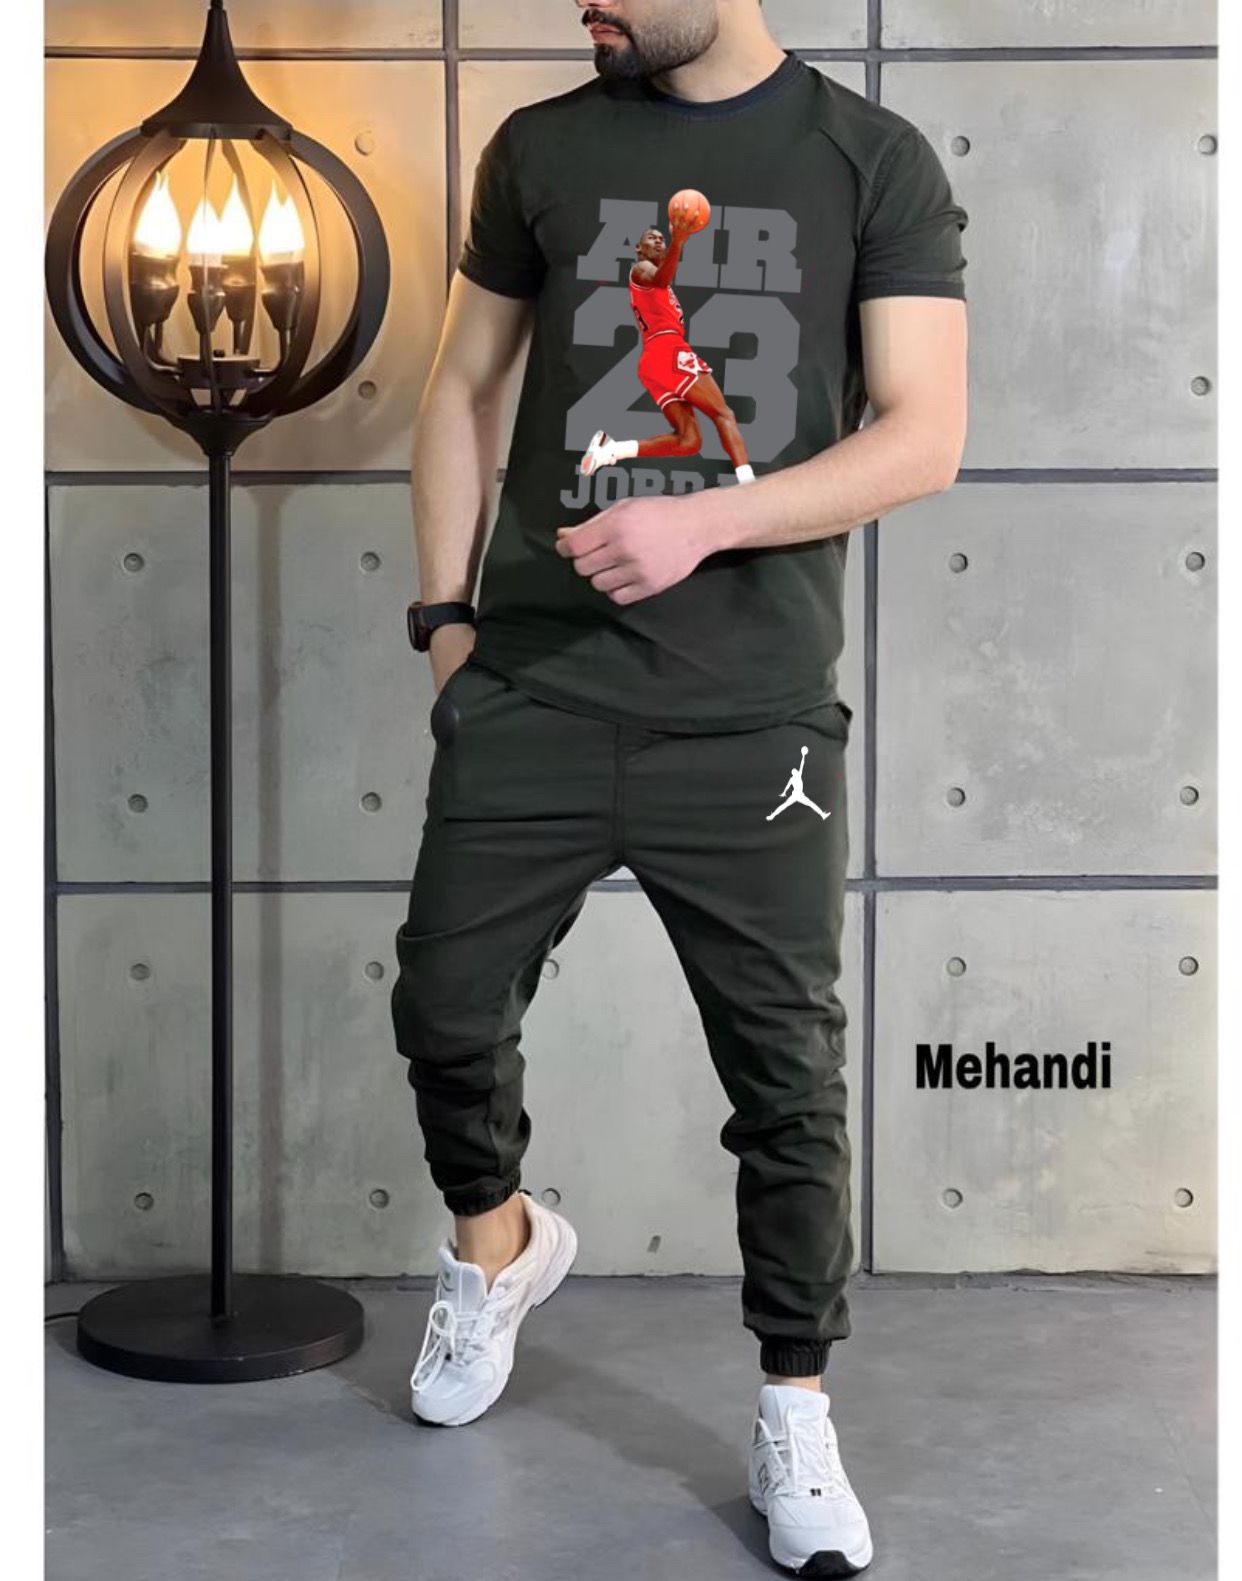 Details View - Jordan Tracksuit photos - reseller,reseller marketplace,advetising your products,reseller bazzar,resellerbazzar.in,india's classified site,Jordan Tracksuit | Jordan Tracksuit in surat | Jordan Tracksuit for man | Tracksuit for man